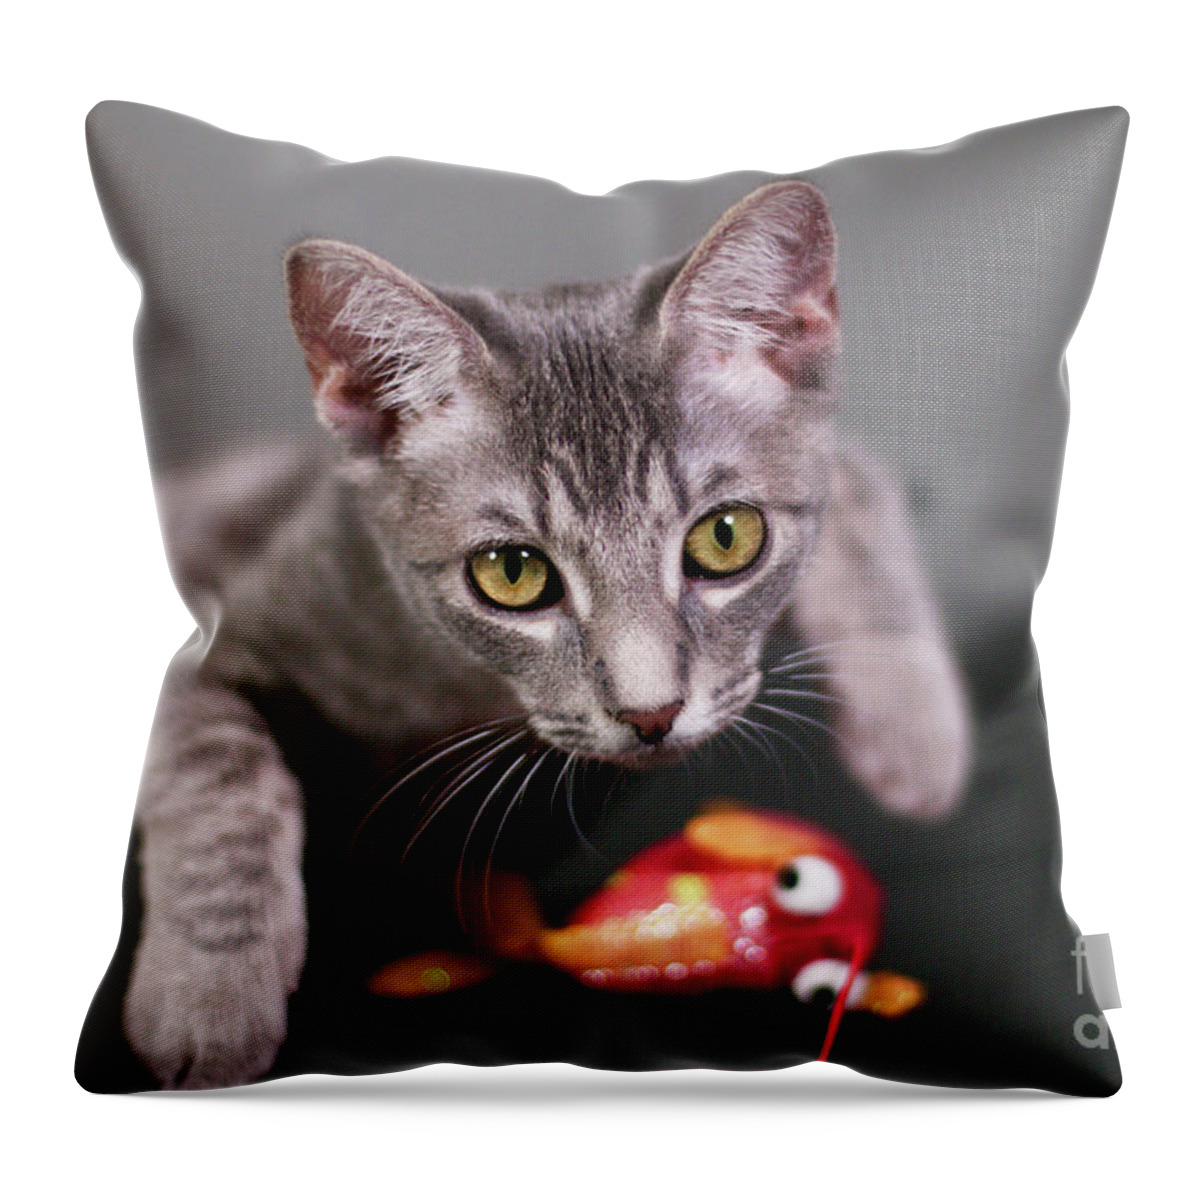 Digital Photography Throw Pillow featuring the photograph Fishing by Afrodita Ellerman